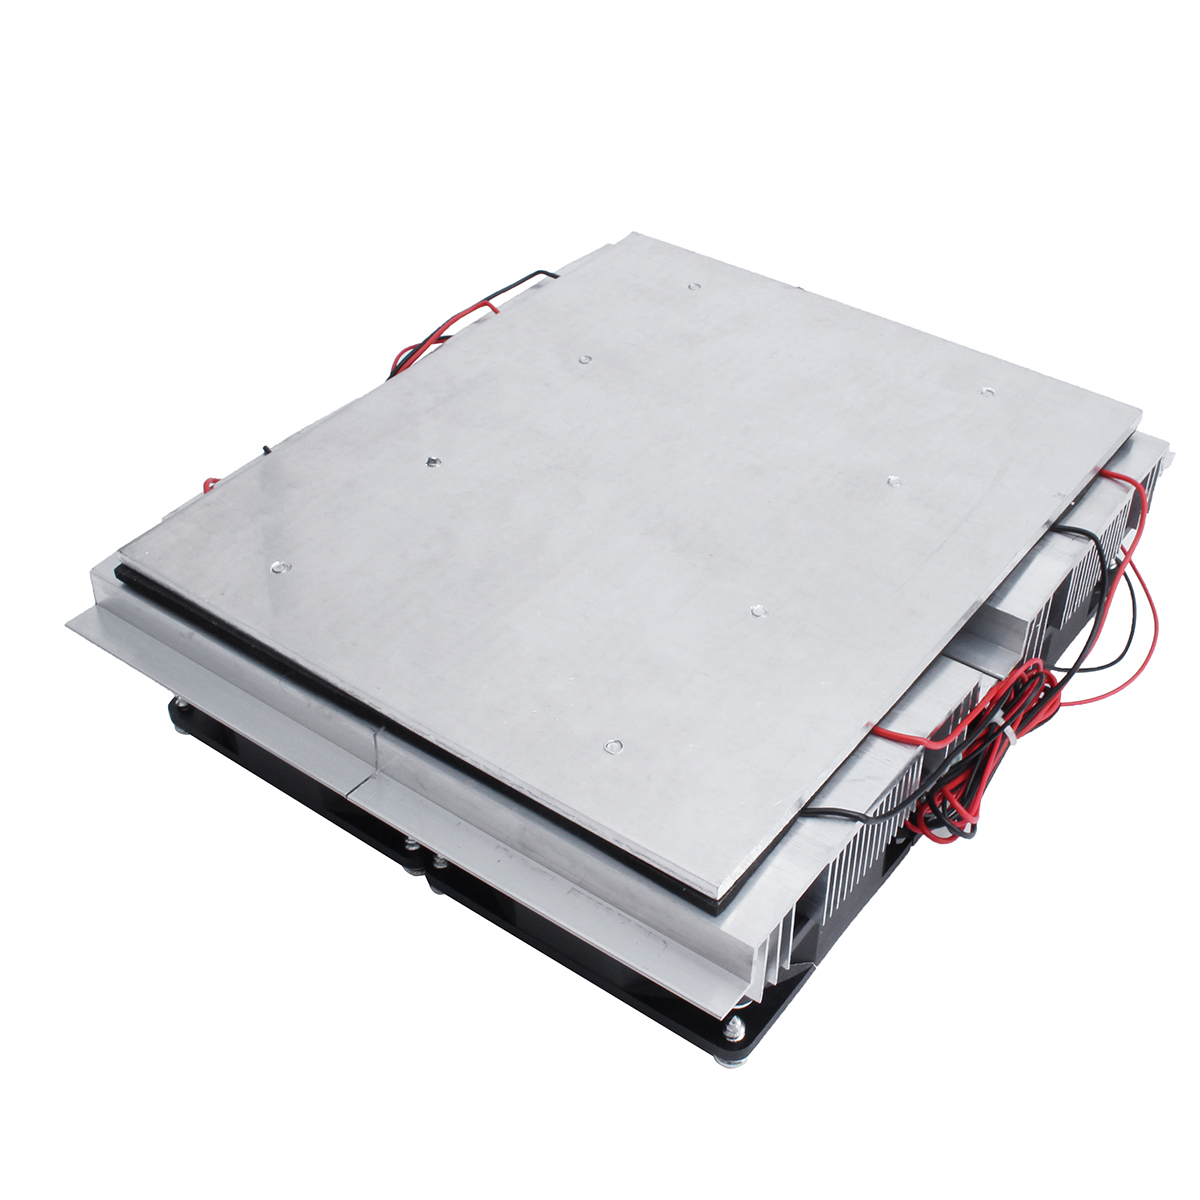 

DC 12V 30A Semiconductor Refrigeration Radiator Cooling Equipment Plate Module With Four Fan